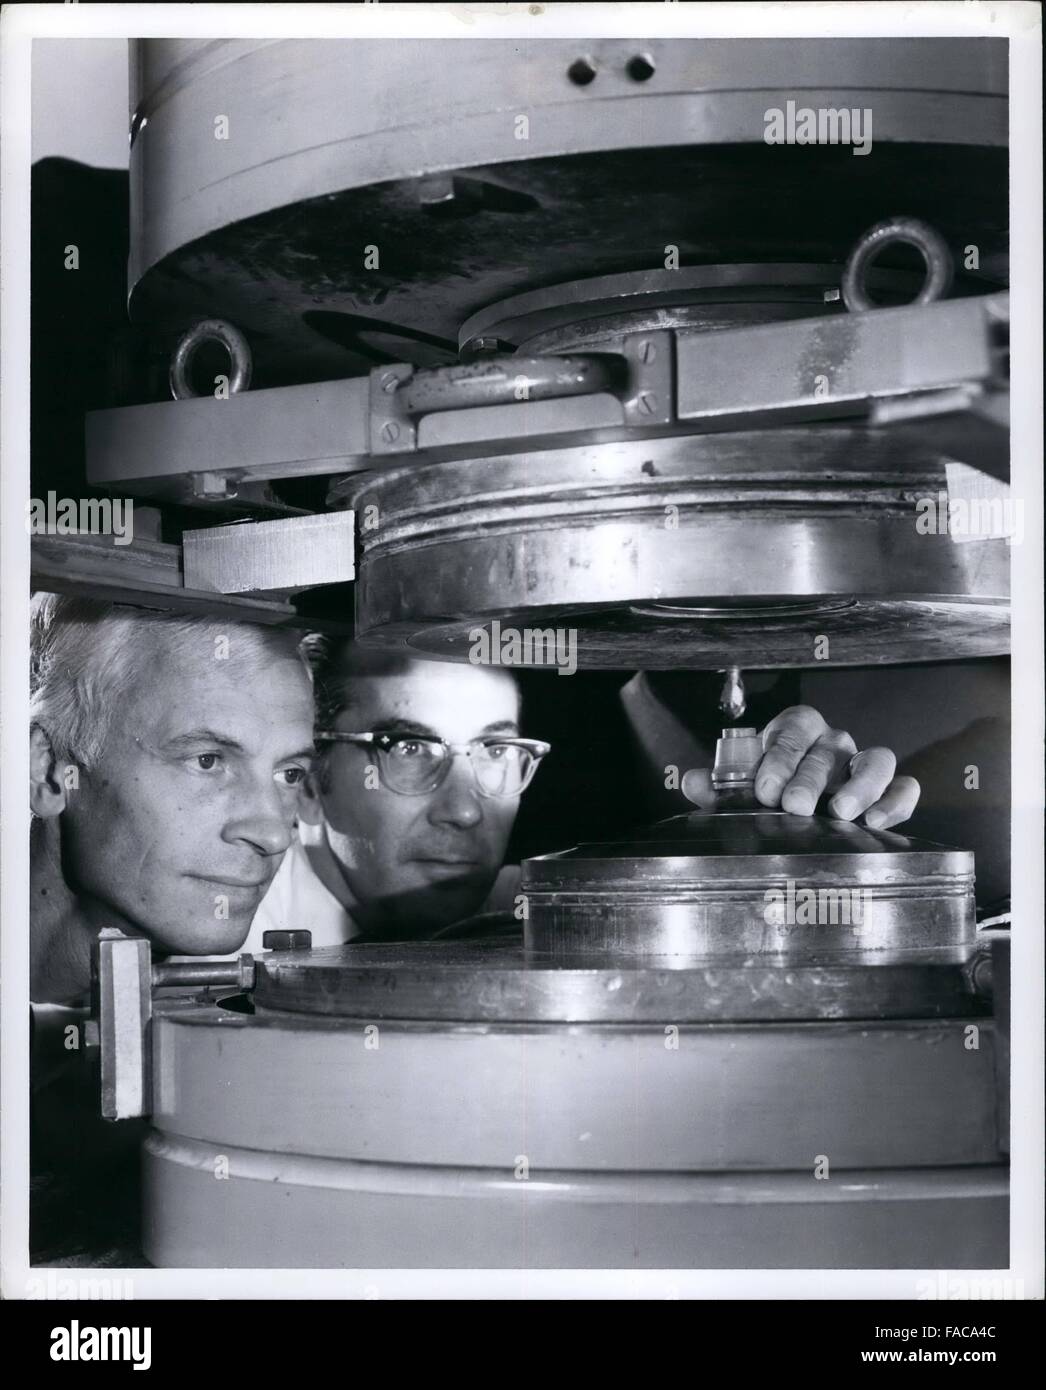 1972 - Big Squeeze: High pressure-high temperature equipment is used by scientists at the General Electric Research and Development Center, Schenectady, N.Y., to compress thousands of tiny crystals of Man-MadeÃ¢''ž¢ diamond or BorazonÃ¢''ž¢ cubic boron nitride into two new families of cutting tools. Designed to machine the world's toughest materials at high speeds and low wear, the tools promise dramatic increases in cutting speeds, tool life, and overall productivity. Dr. Robert H. Wentorf, Jr. (left) and William A. Rocco prepare one of the giant presses used to convert the Man-Made diamond o Stock Photo